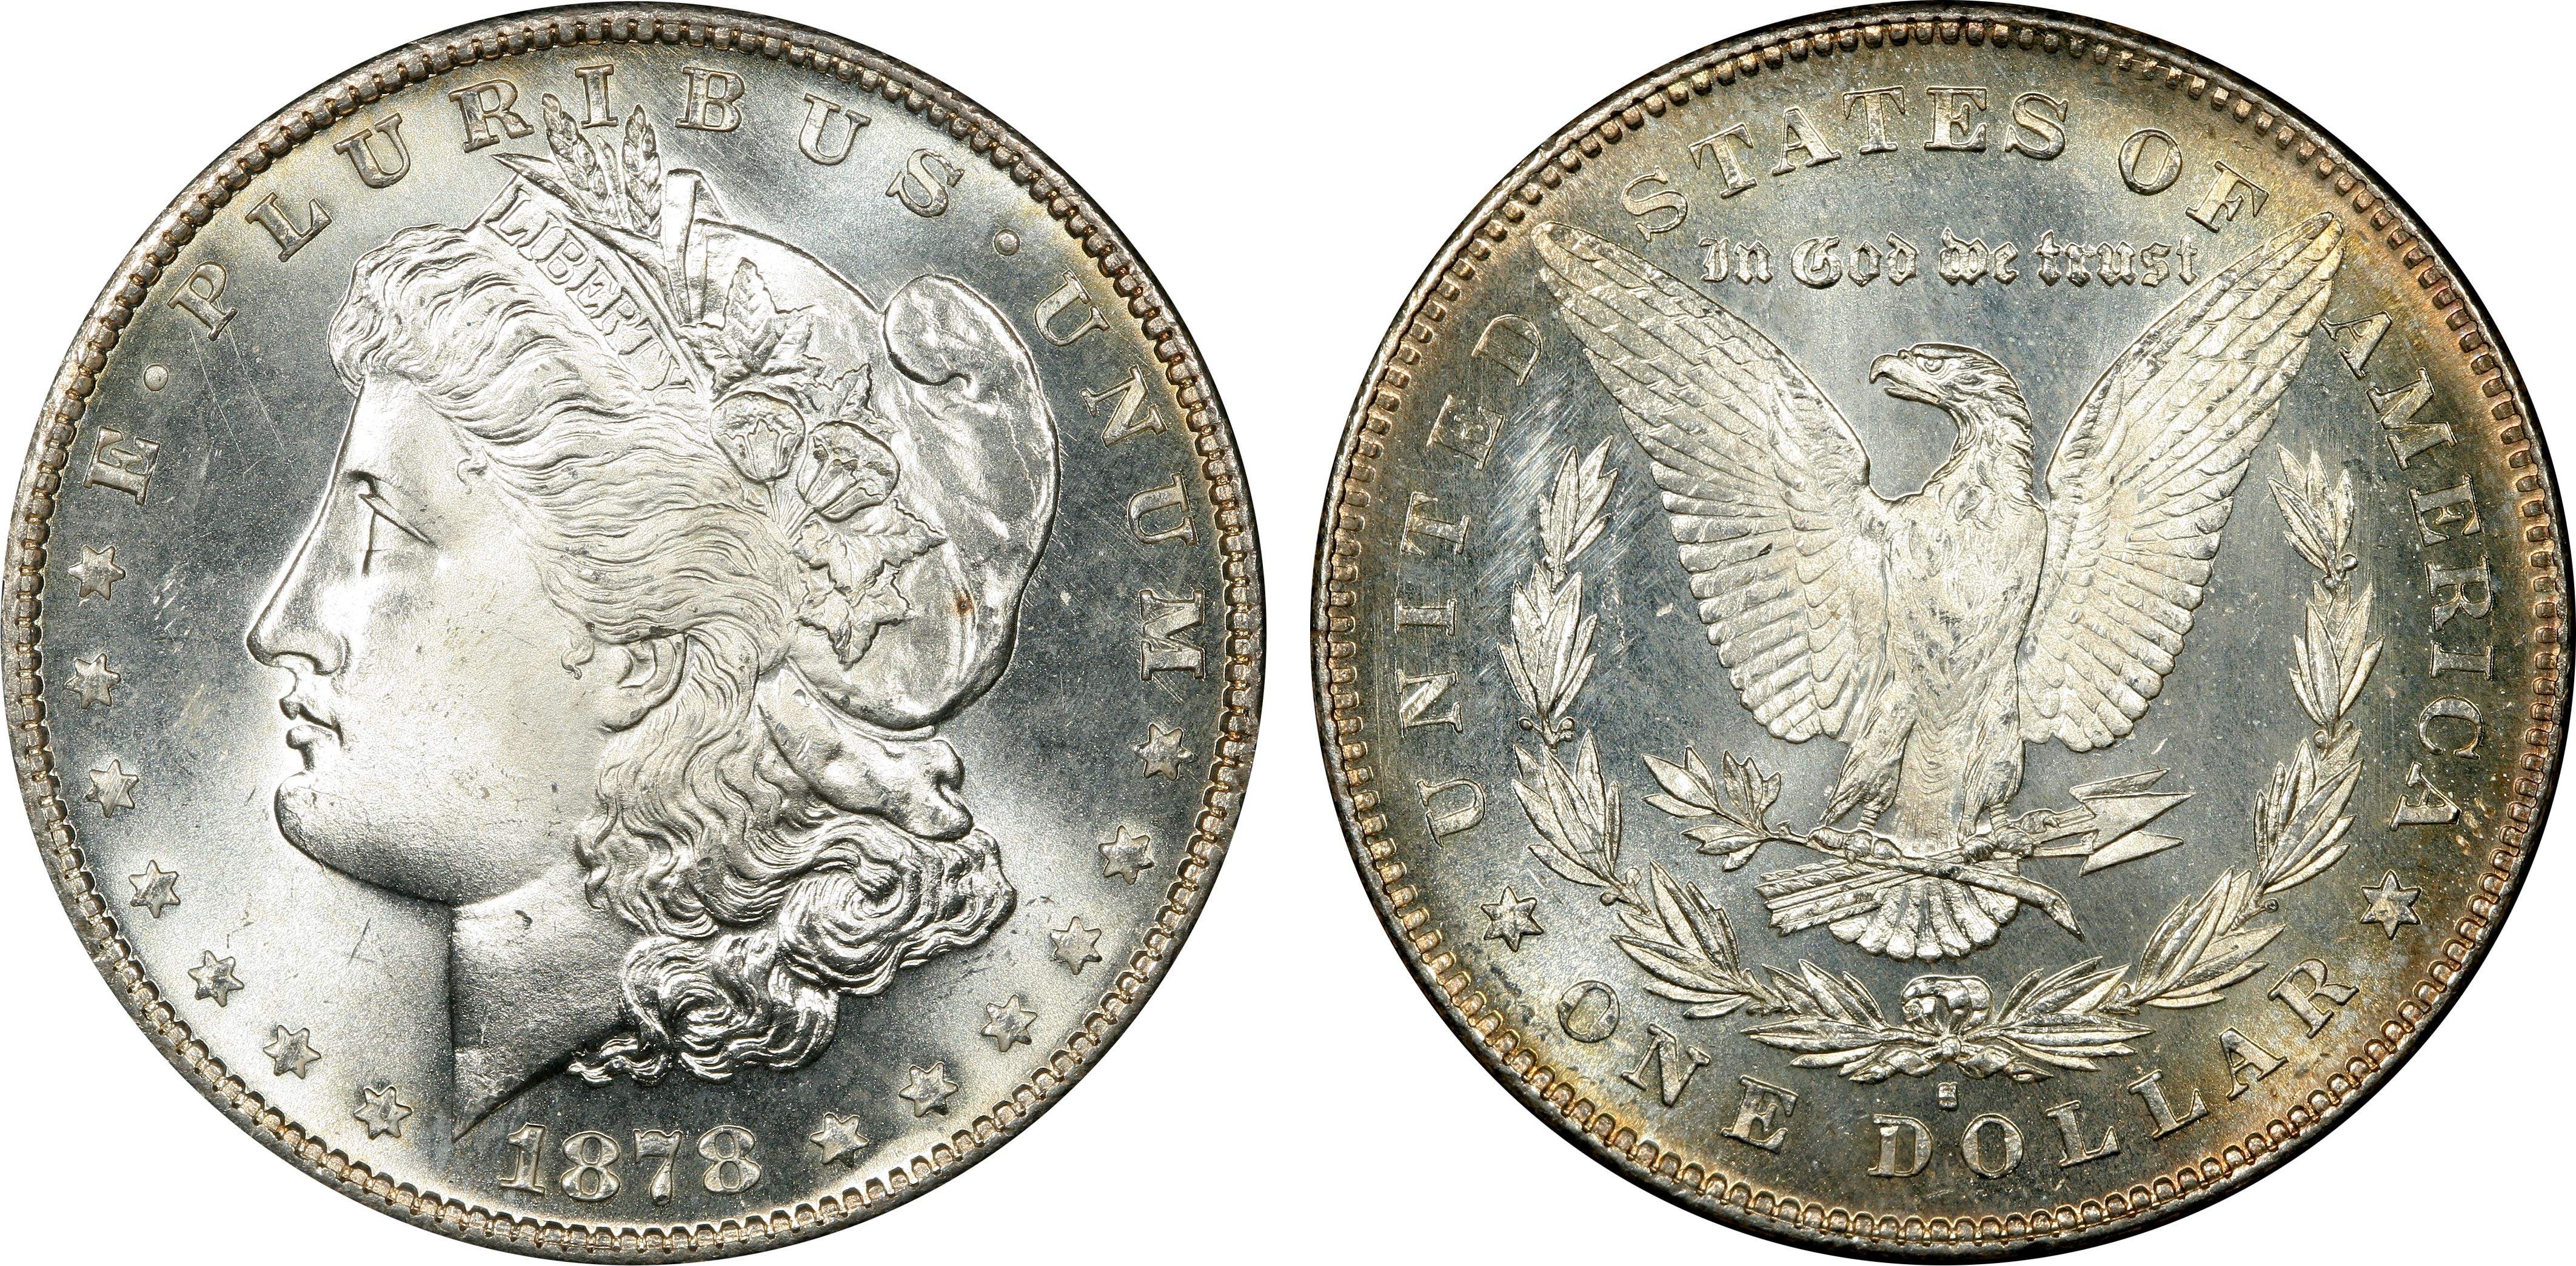 Details about   1878-S MORGAN SILVER $1 DOLLAR SAN FRANCISCO MINT 90% INVESTMENT BULLION